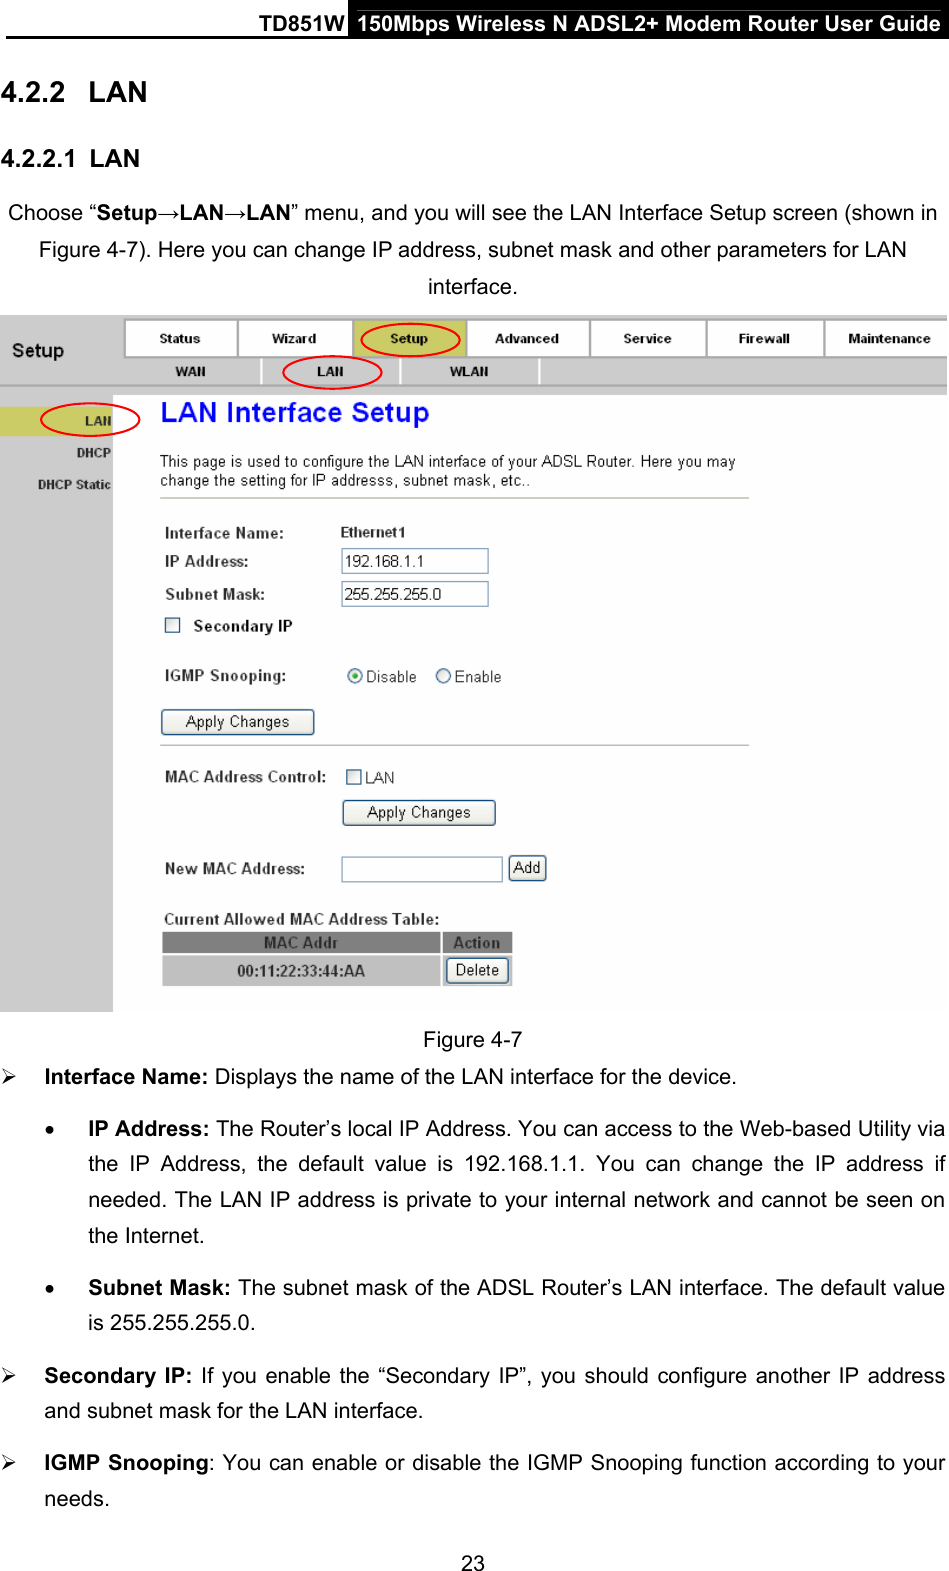 TD851W  150Mbps Wireless N ADSL2+ Modem Router User Guide 4.2.2  LAN 4.2.2.1  LAN Choose “Setup→LAN→LAN” menu, and you will see the LAN Interface Setup screen (shown in Figure 4-7). Here you can change IP address, subnet mask and other parameters for LAN interface.  Figure 4-7 ¾ Interface Name: Displays the name of the LAN interface for the device.   • IP Address: The Router’s local IP Address. You can access to the Web-based Utility via the IP Address, the default value is 192.168.1.1. You can change the IP address if needed. The LAN IP address is private to your internal network and cannot be seen on the Internet. • Subnet Mask: The subnet mask of the ADSL Router’s LAN interface. The default value is 255.255.255.0. ¾ Secondary IP: If you enable the “Secondary IP”, you should configure another IP address and subnet mask for the LAN interface. ¾ IGMP Snooping: You can enable or disable the IGMP Snooping function according to your needs. 23 